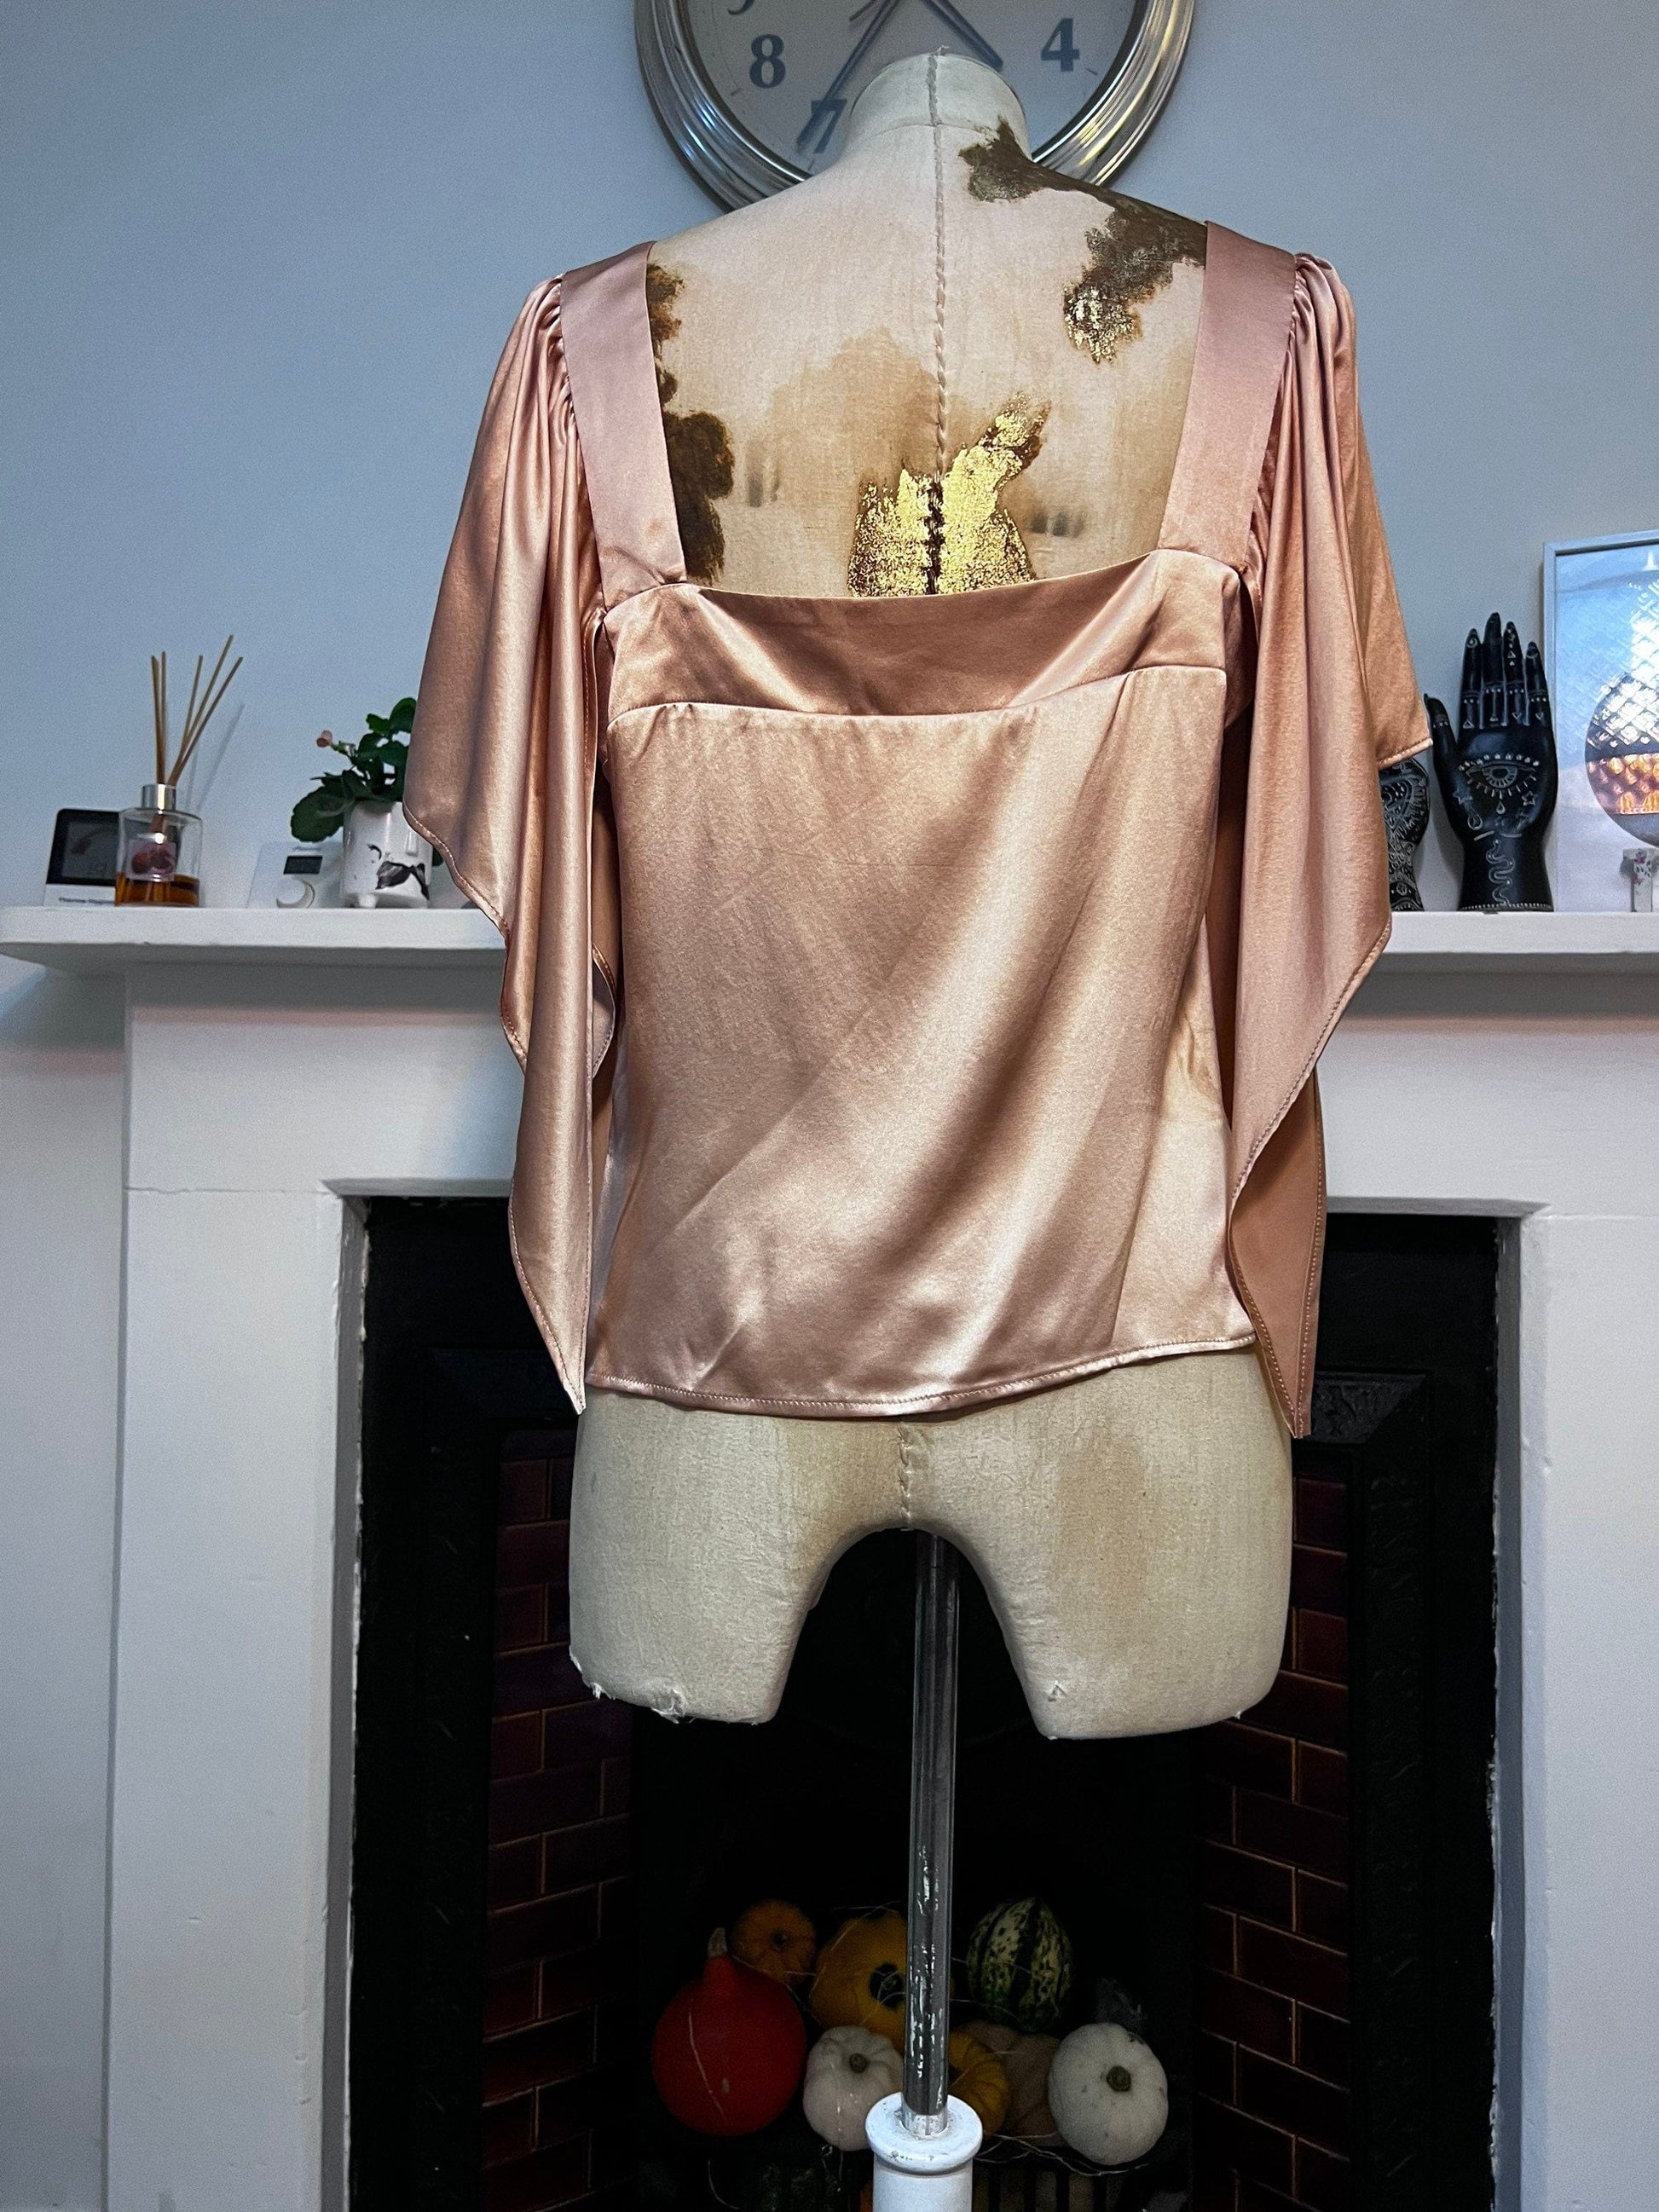 Vintage Rose Gold Silk Blouse - Paul and Joe Paris Silk Top - French Silk Blouse - Immaculate Vintage Blouse - Size 3